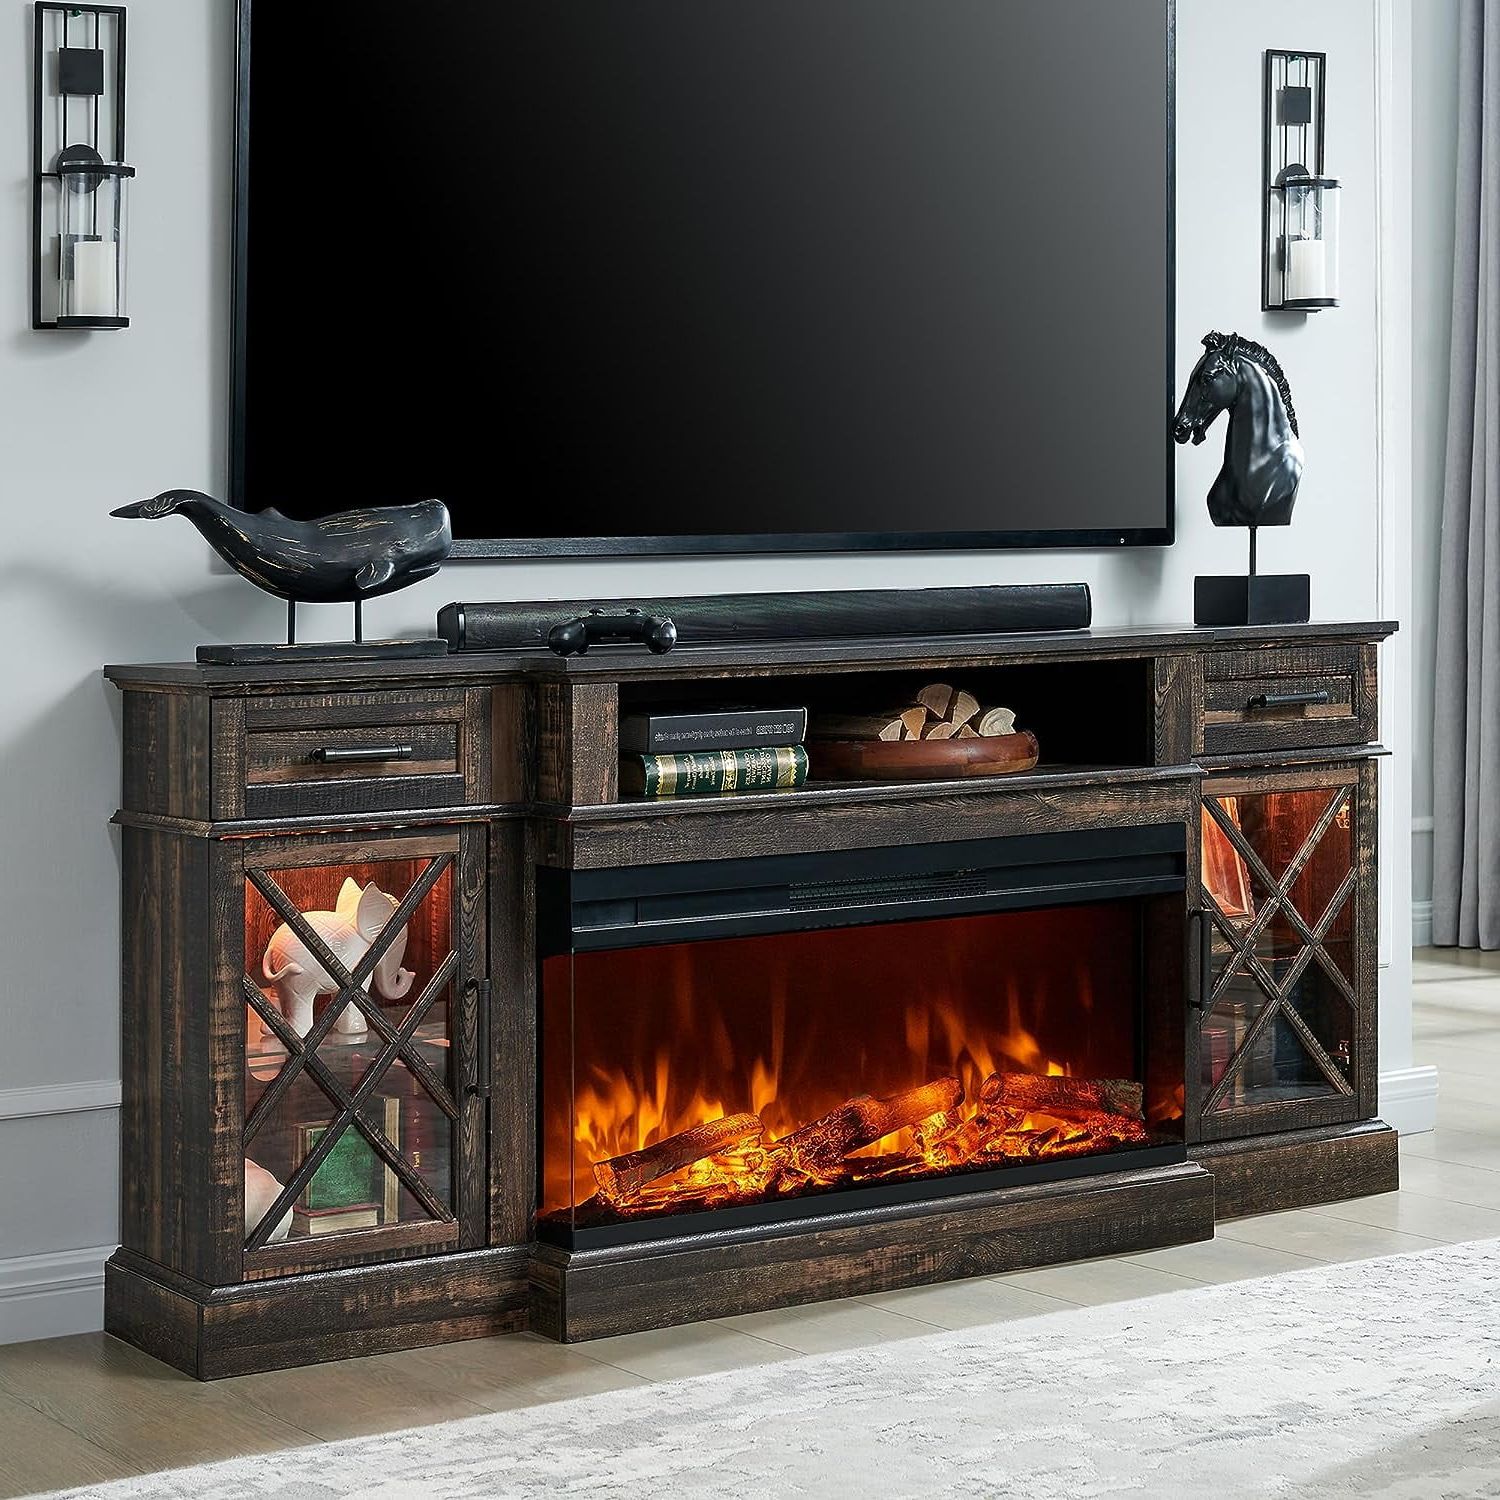 Okd 3 Sided Glass Farmhouse 70" Fireplace Tv Stand For Tvs Up To 80",  Highboy Entertainment Center With 36" Electric Fireplace, Dark Rustic Oak –  Walmart Inside Tv Stands With Electric Fireplace (Gallery 12 of 20)